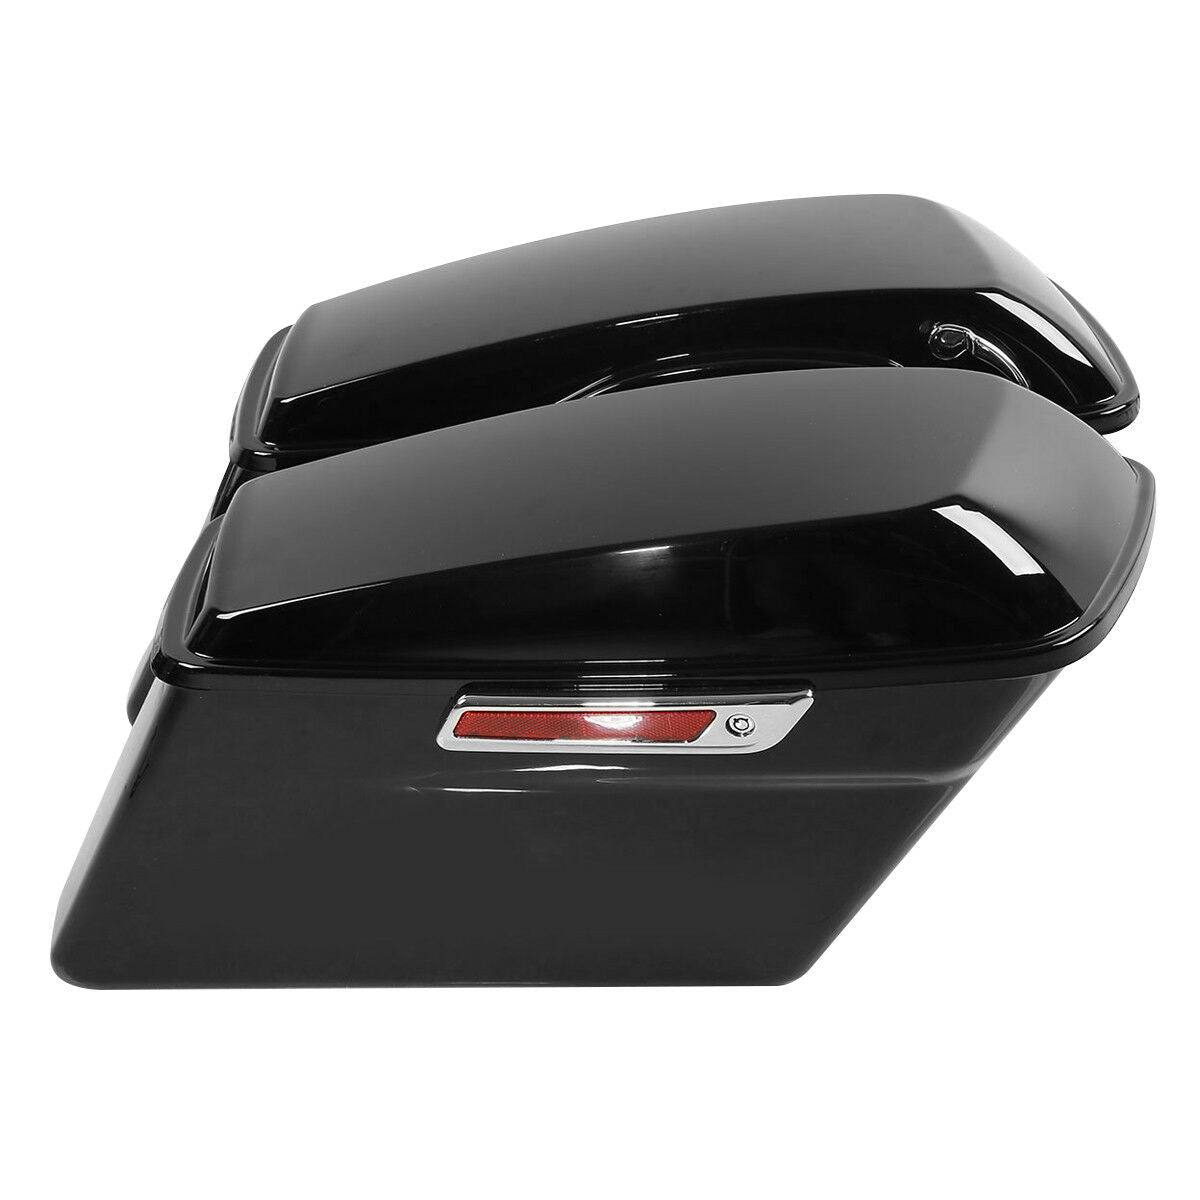 Black Hard Saddlebags Fit For Harley Heritage Softail Fatboy Deluxe 1984-2017 16 - Moto Life Products